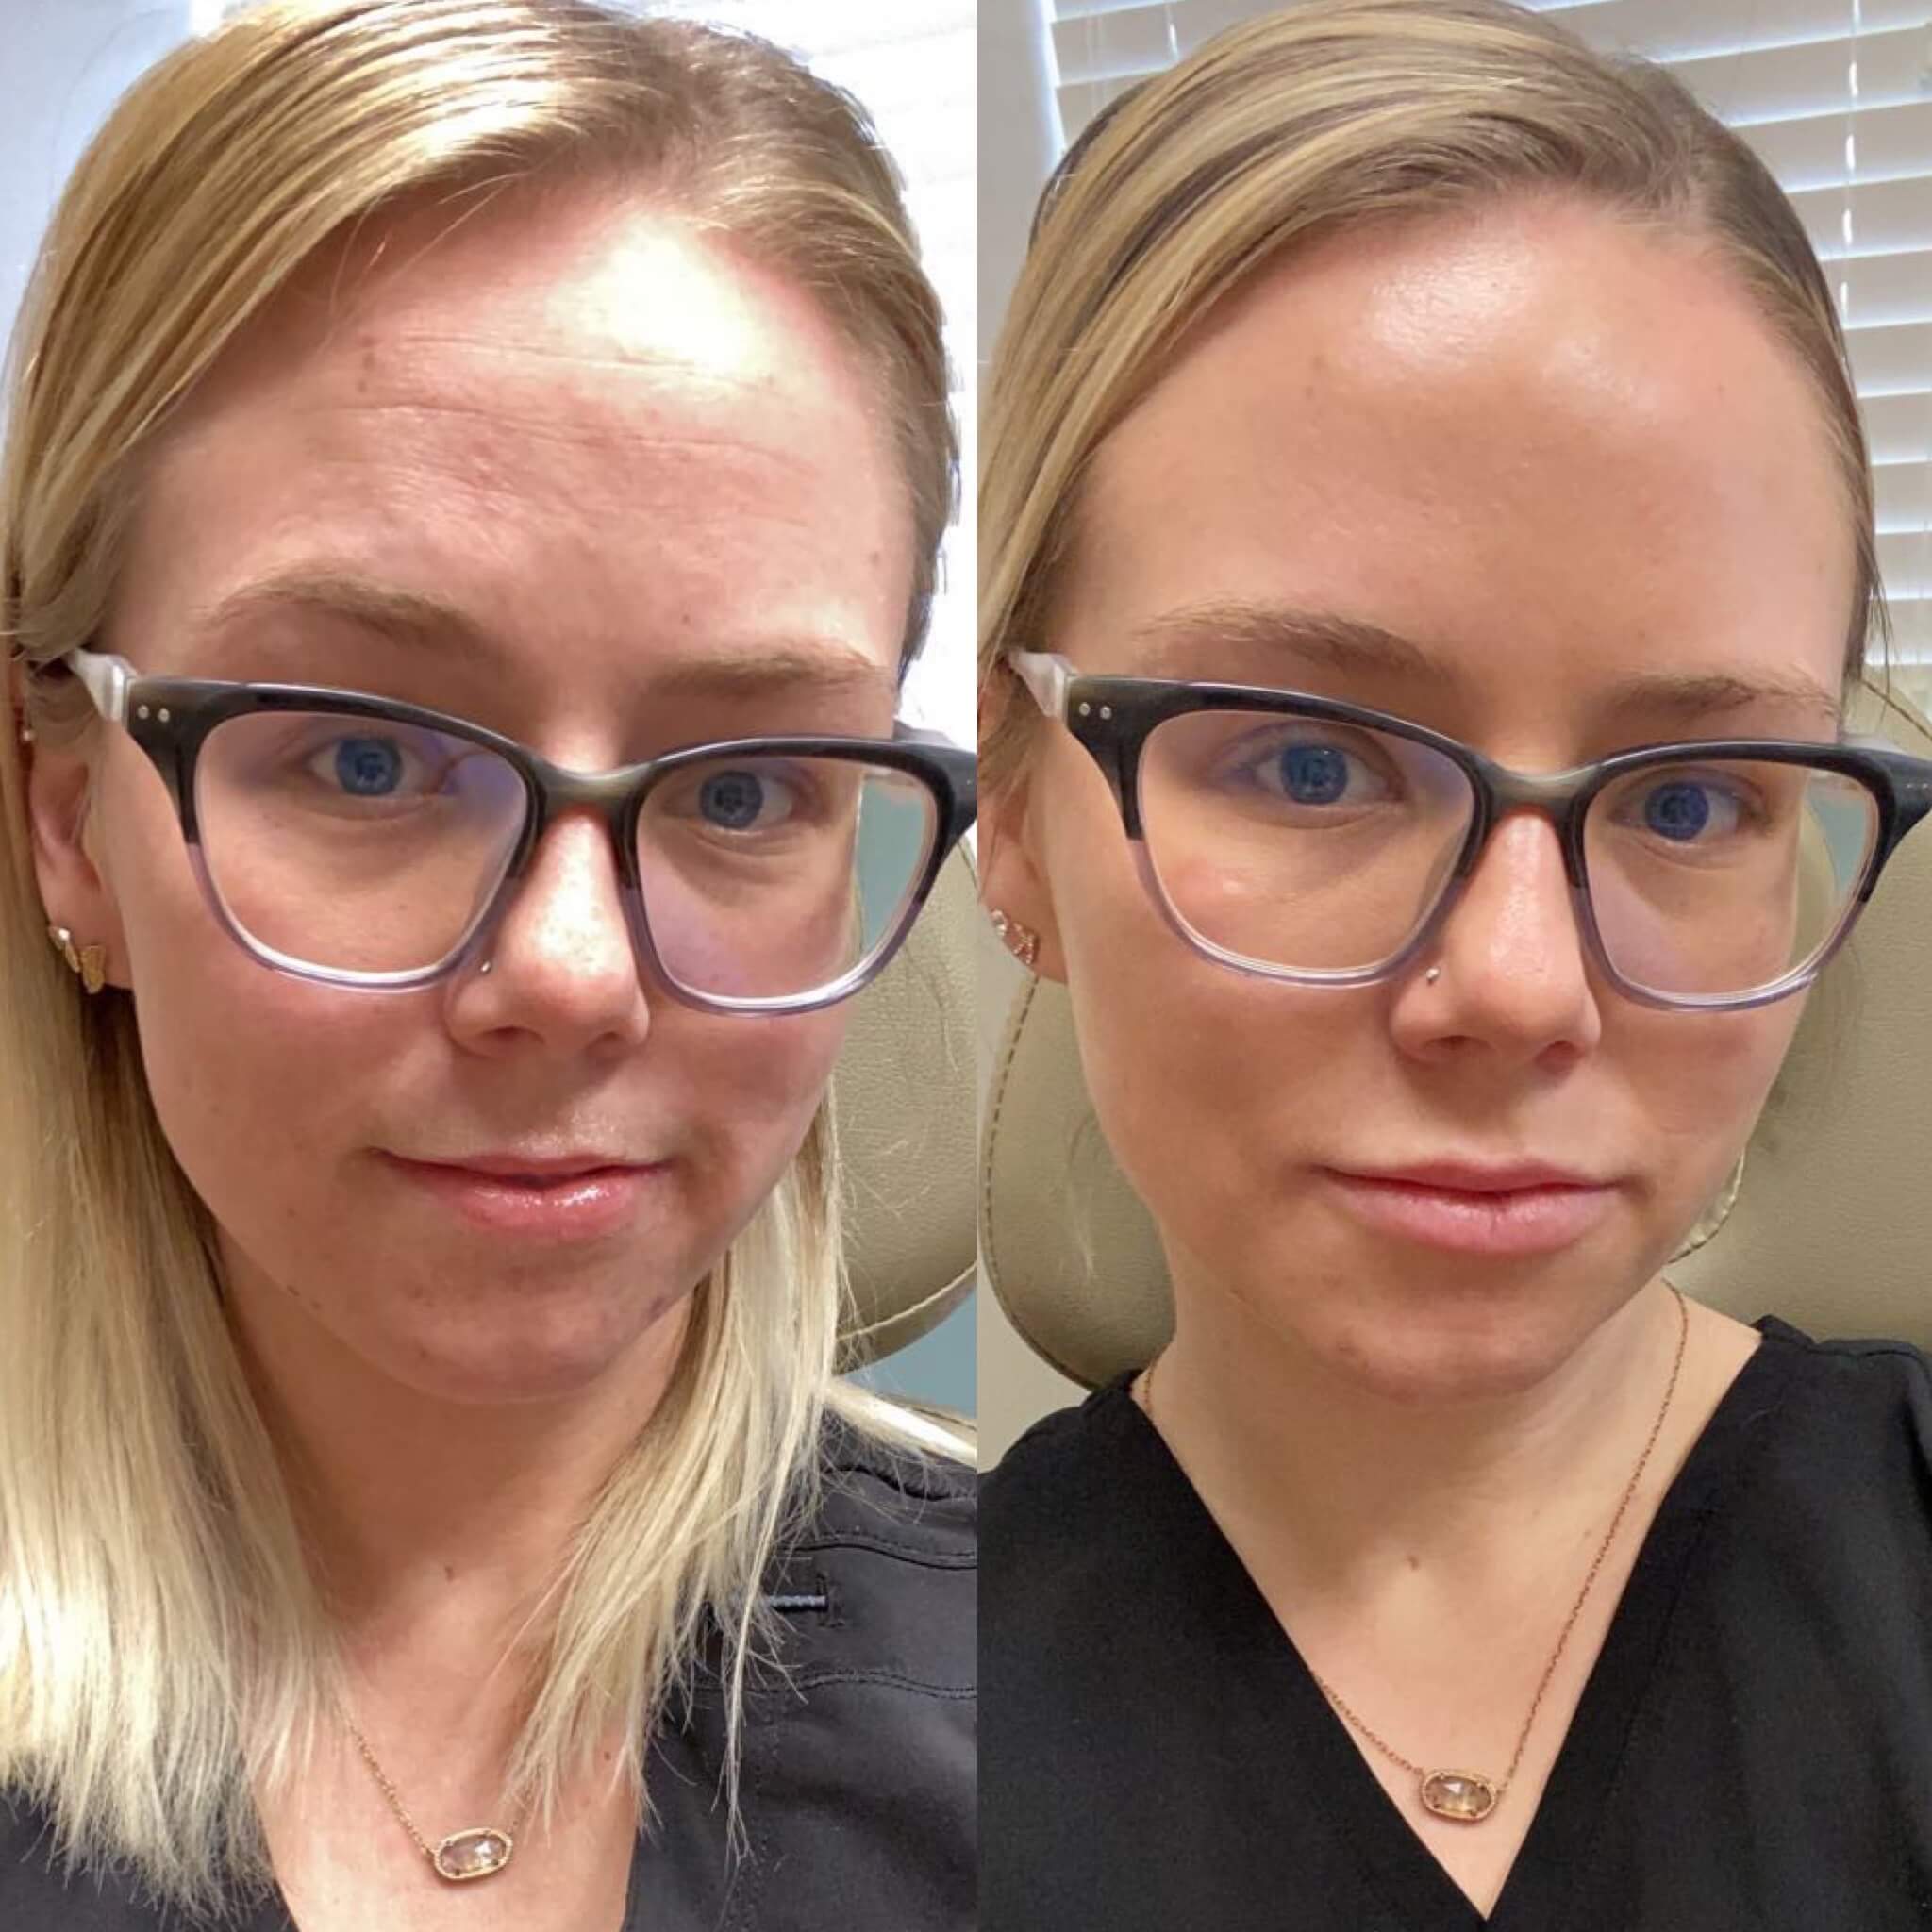 botox treatment before and after photos 